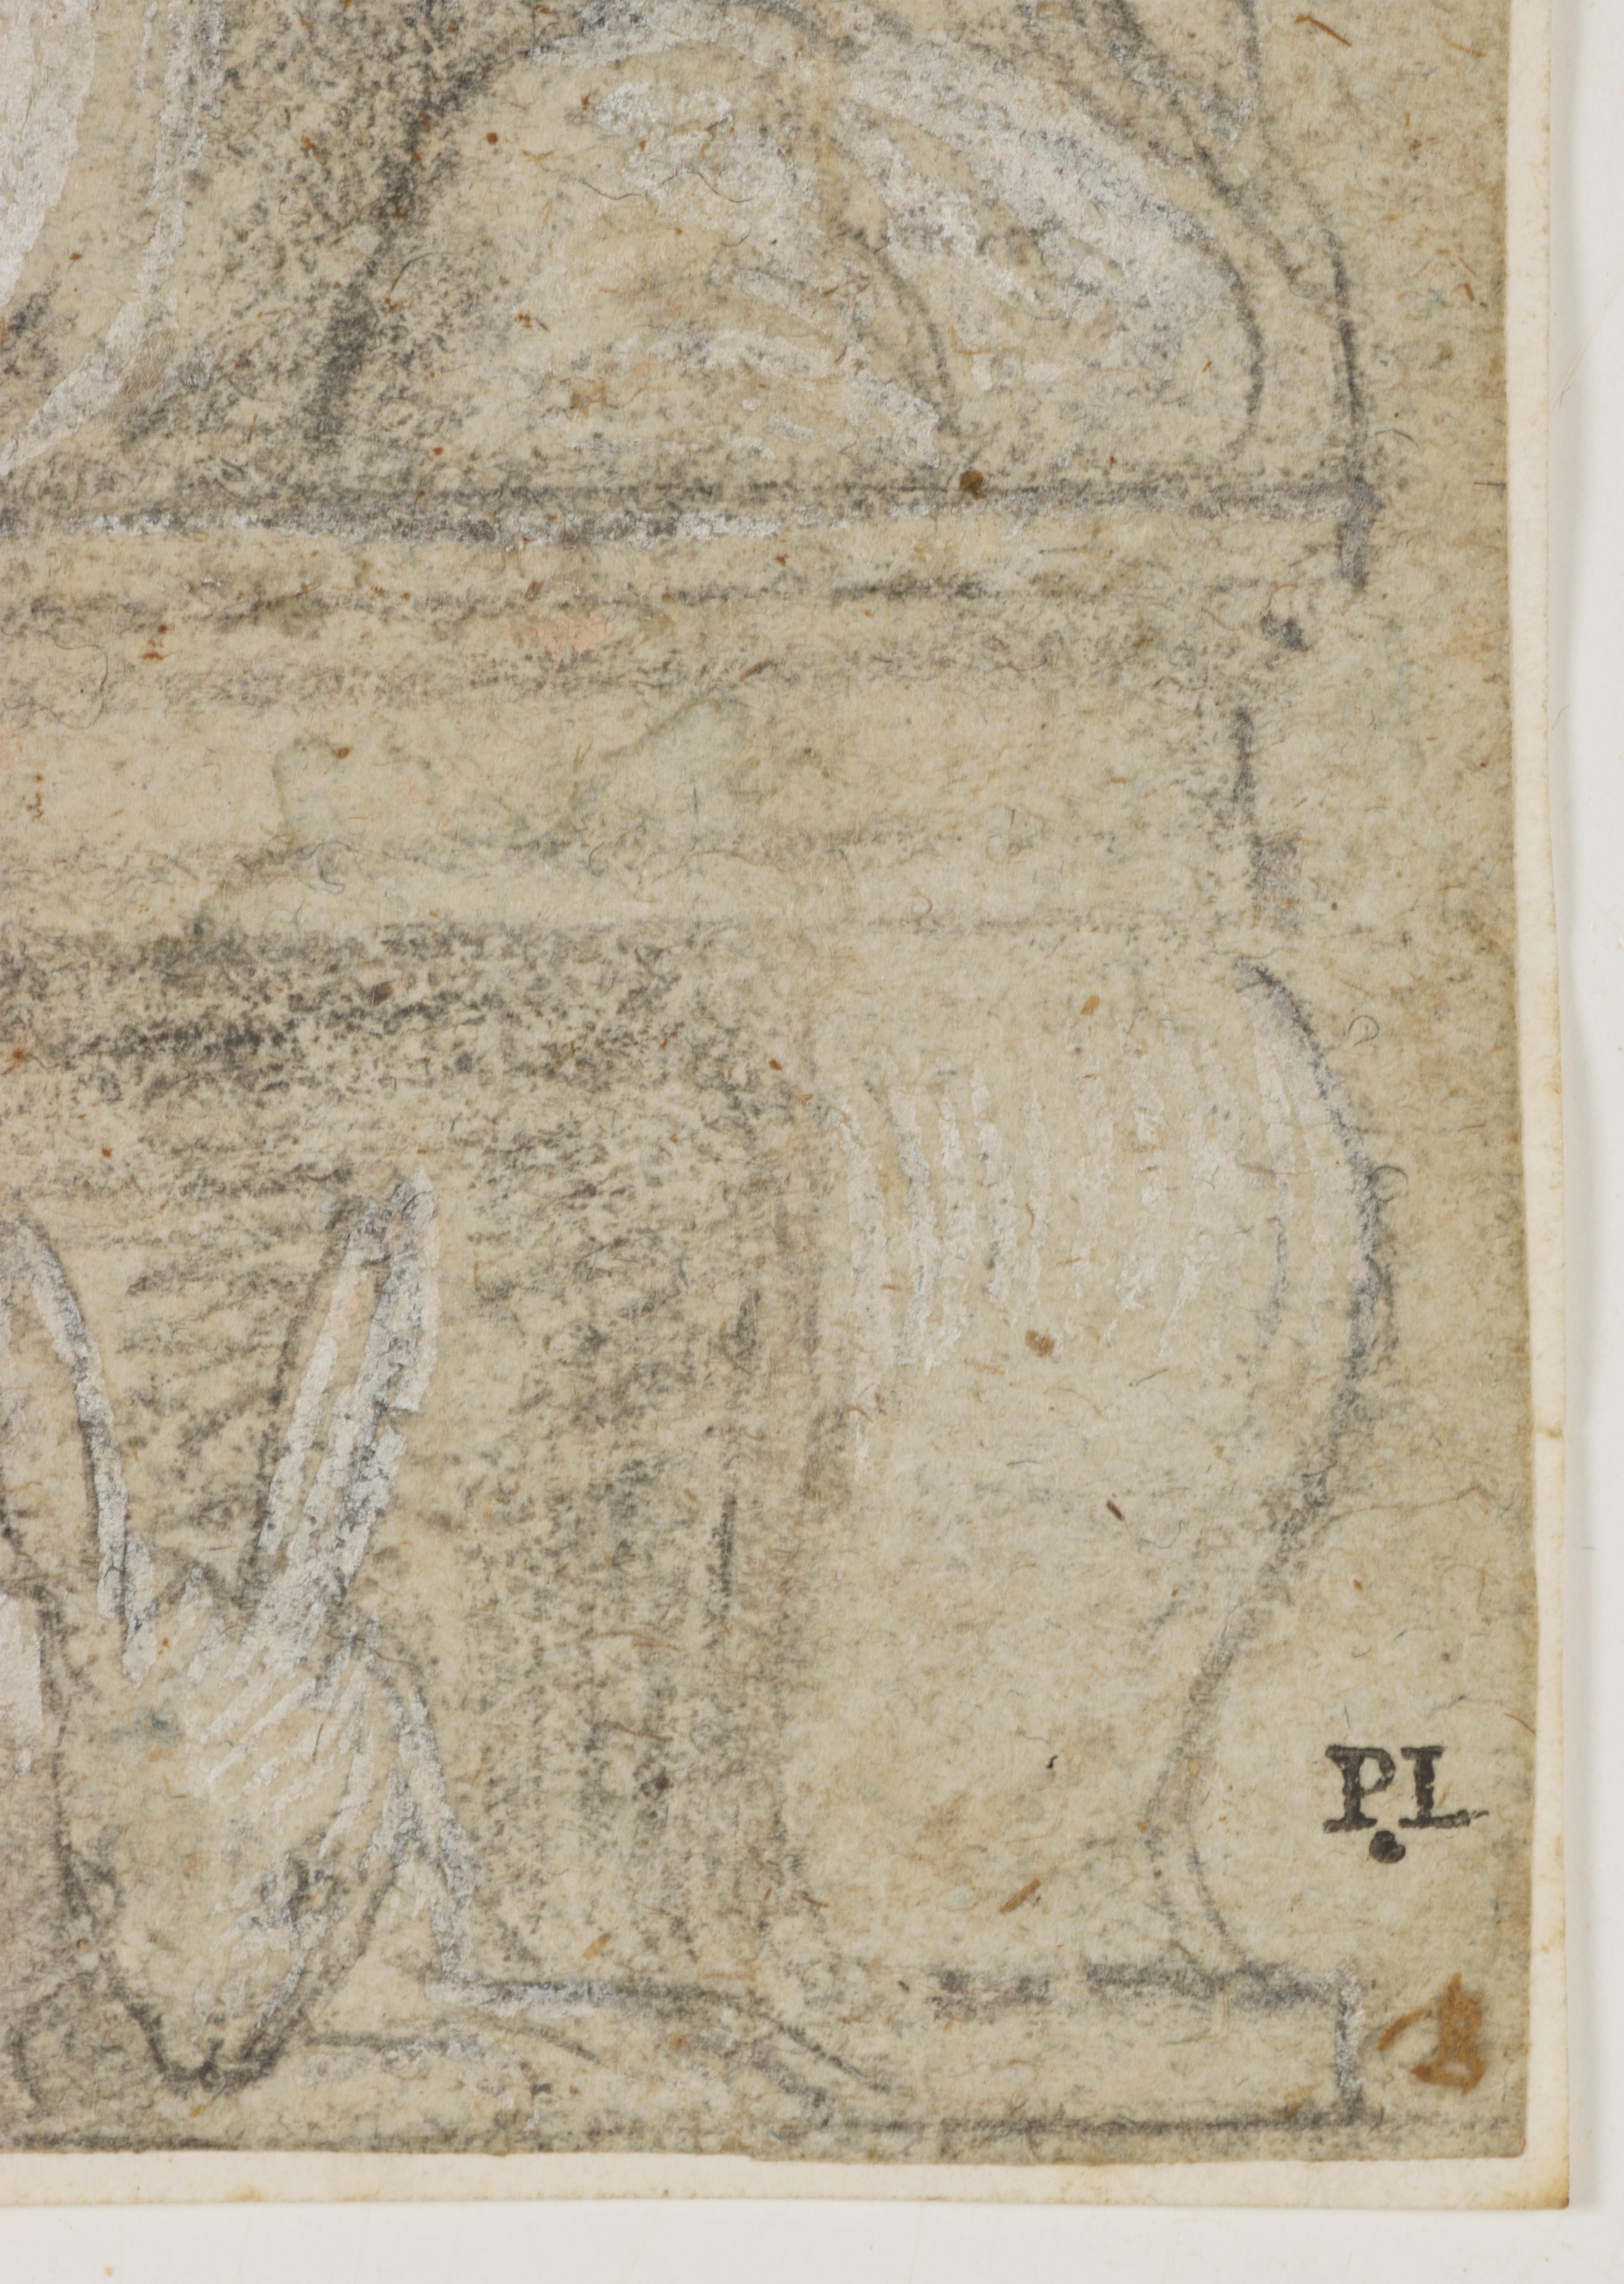 This magnificent drawing from the Venetian Renaissance intrigues us in many ways. It depicts an allegorical composition whose meaning partly escapes us: a veiled figure seated on a stone bench (which we have identified as Chastity), seems to be